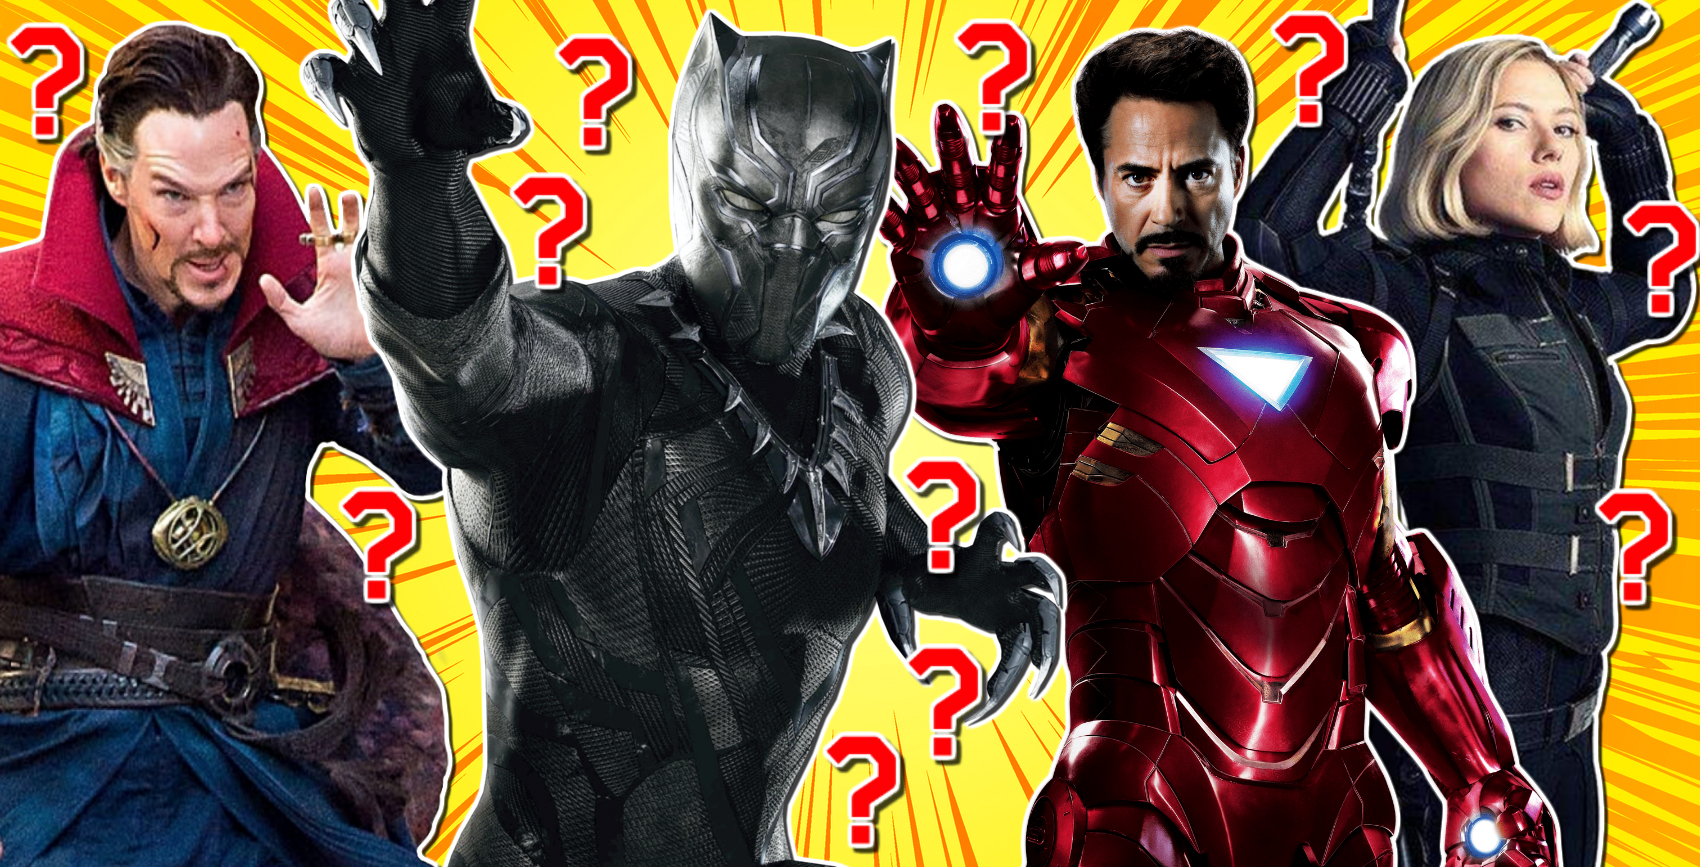 Avengers quiz featuring Iron Man, Dr Strange, Black Panther and Black Widow